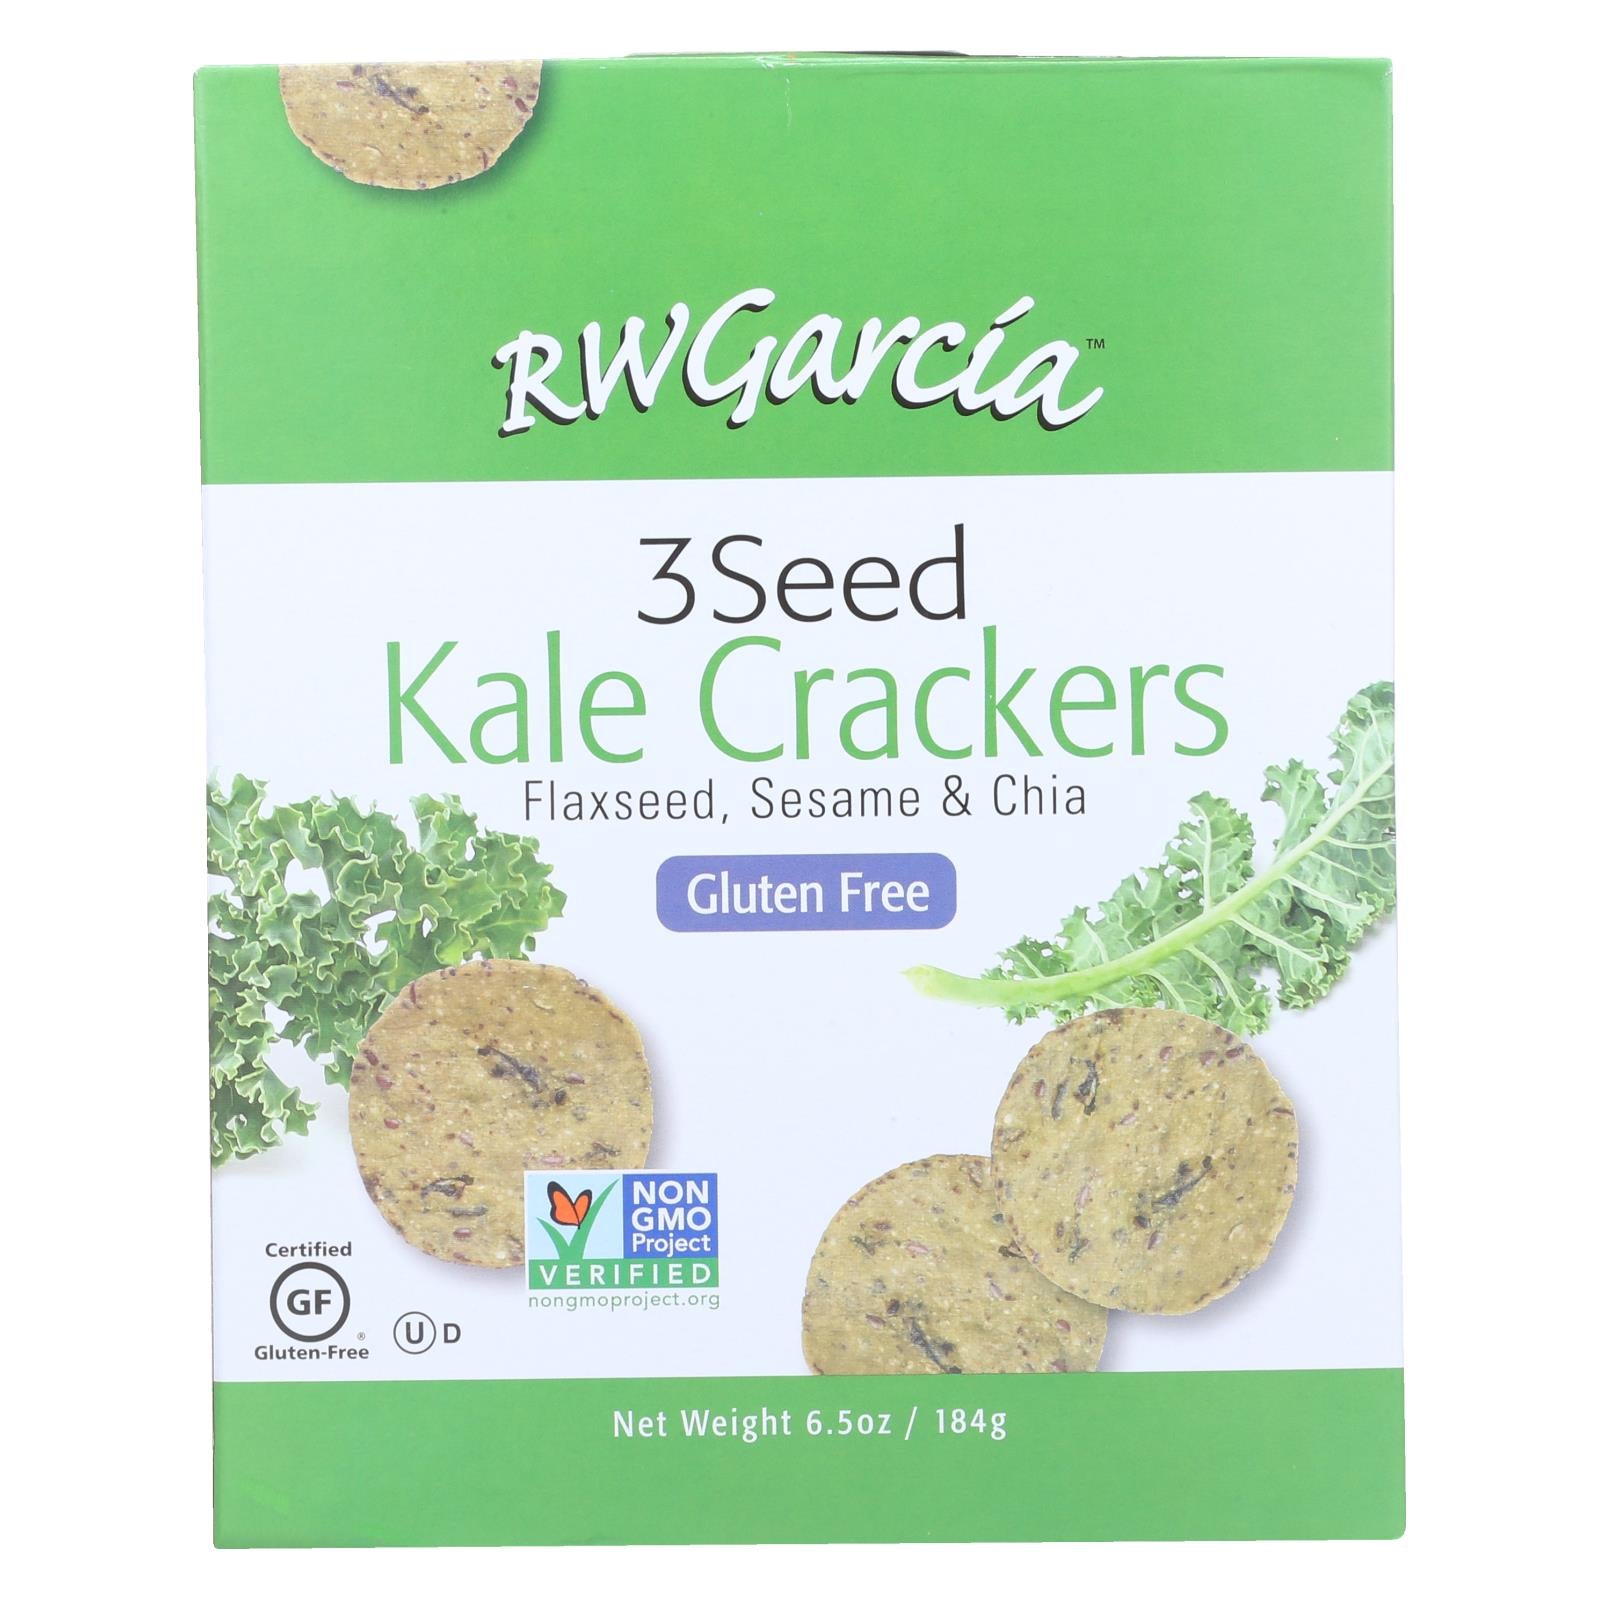 R.w. Garcia Flaxseed, Sesame And Chia 3 Seed Kale Crackers  - Case Of 6 - 6.5 Oz - Whole Green Foods